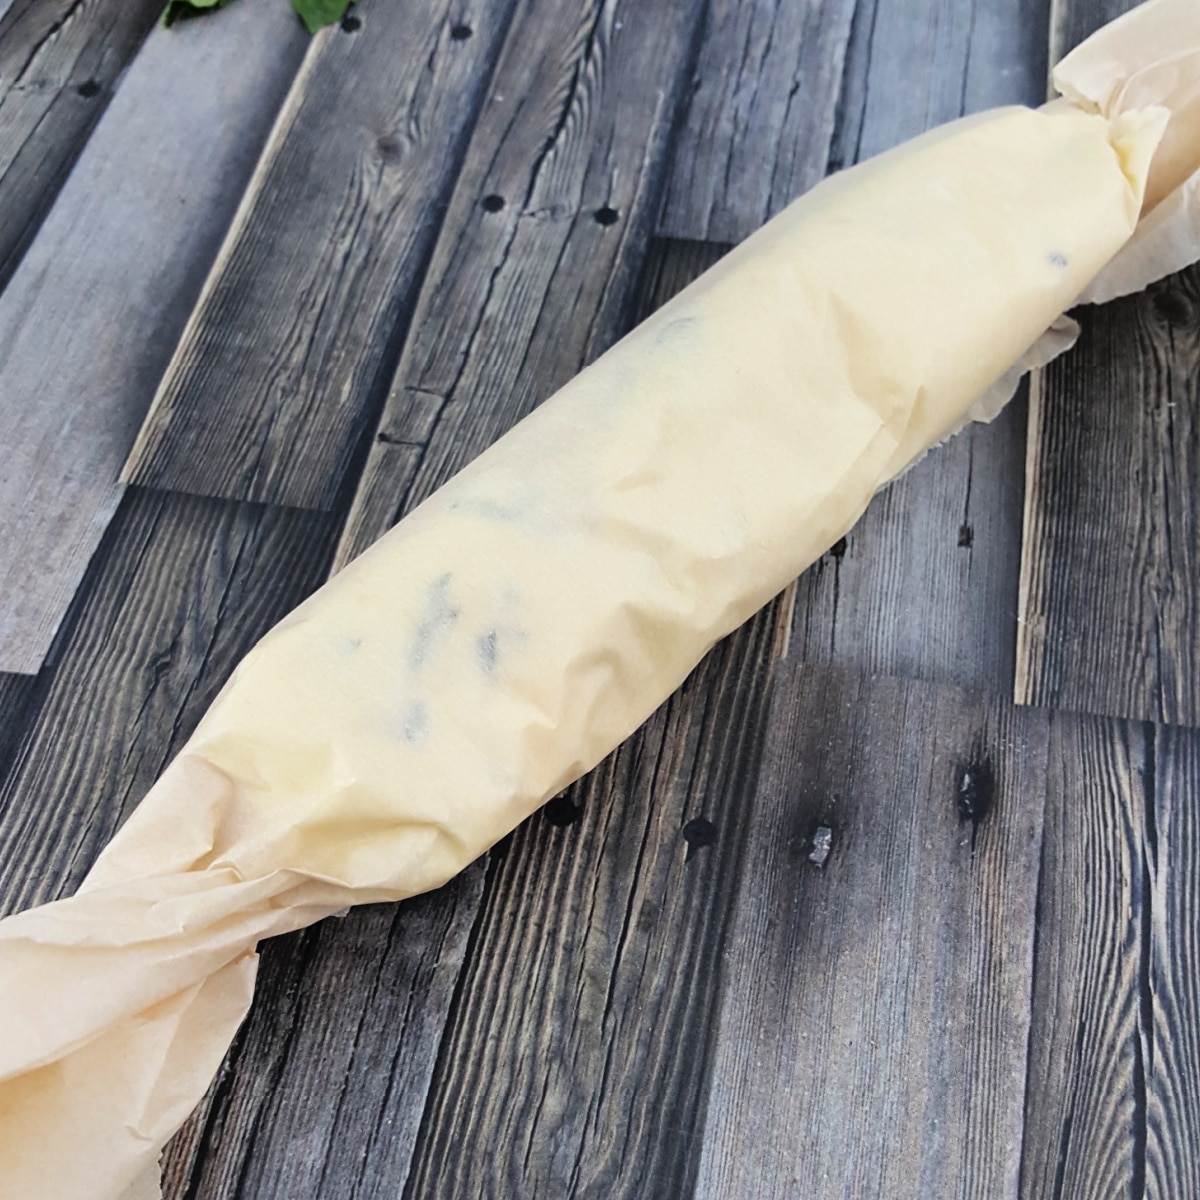 Rolled garlic butter in parchment paper.